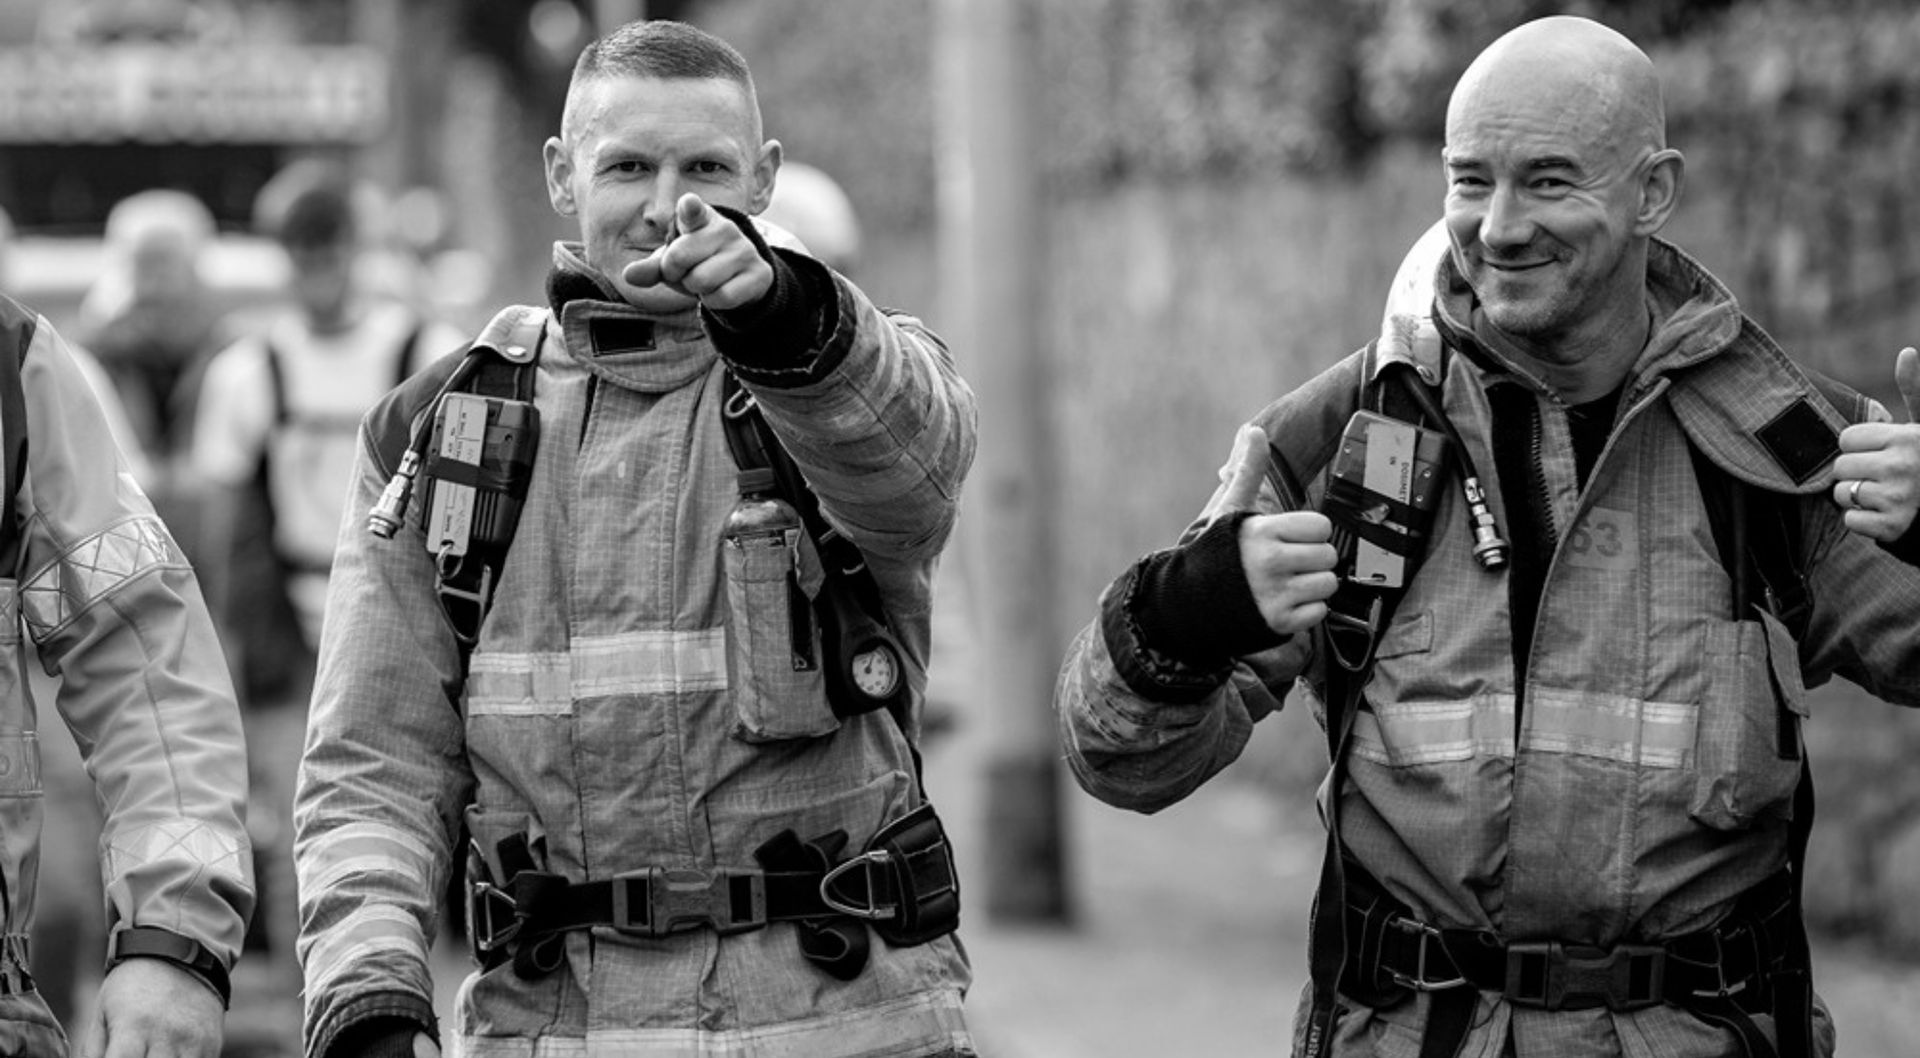 Two fire fighters walking, one pointing at the camera